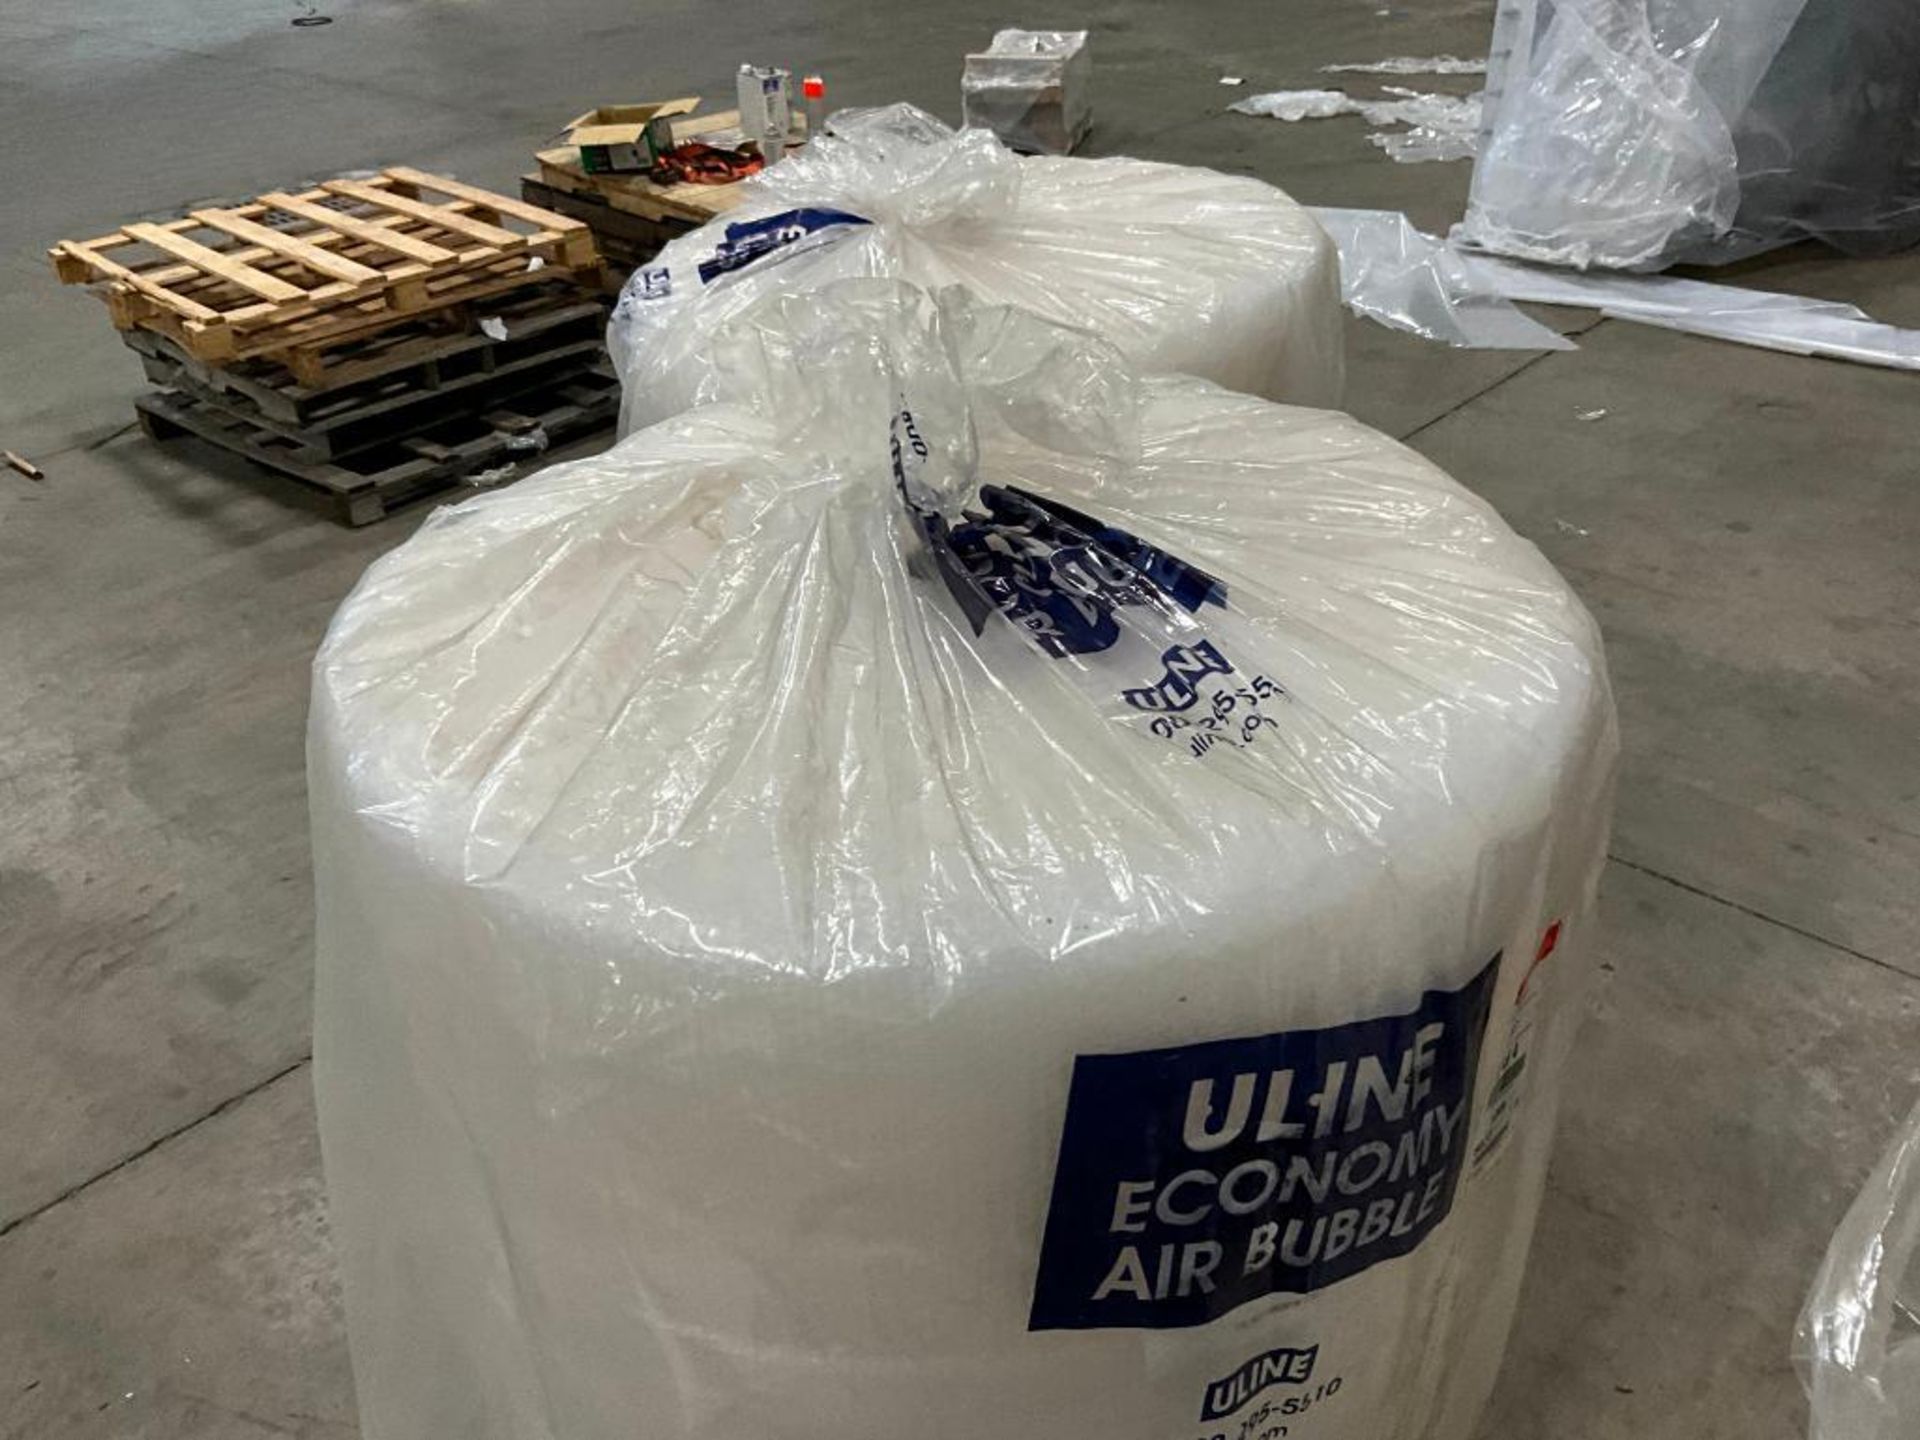 Uline Economy Air Bubble Wrap, 3/16" x 48" x 750', Perfed 12", (2) Rolls in 48" BDL, 1/2 Roll Uline - Image 8 of 16